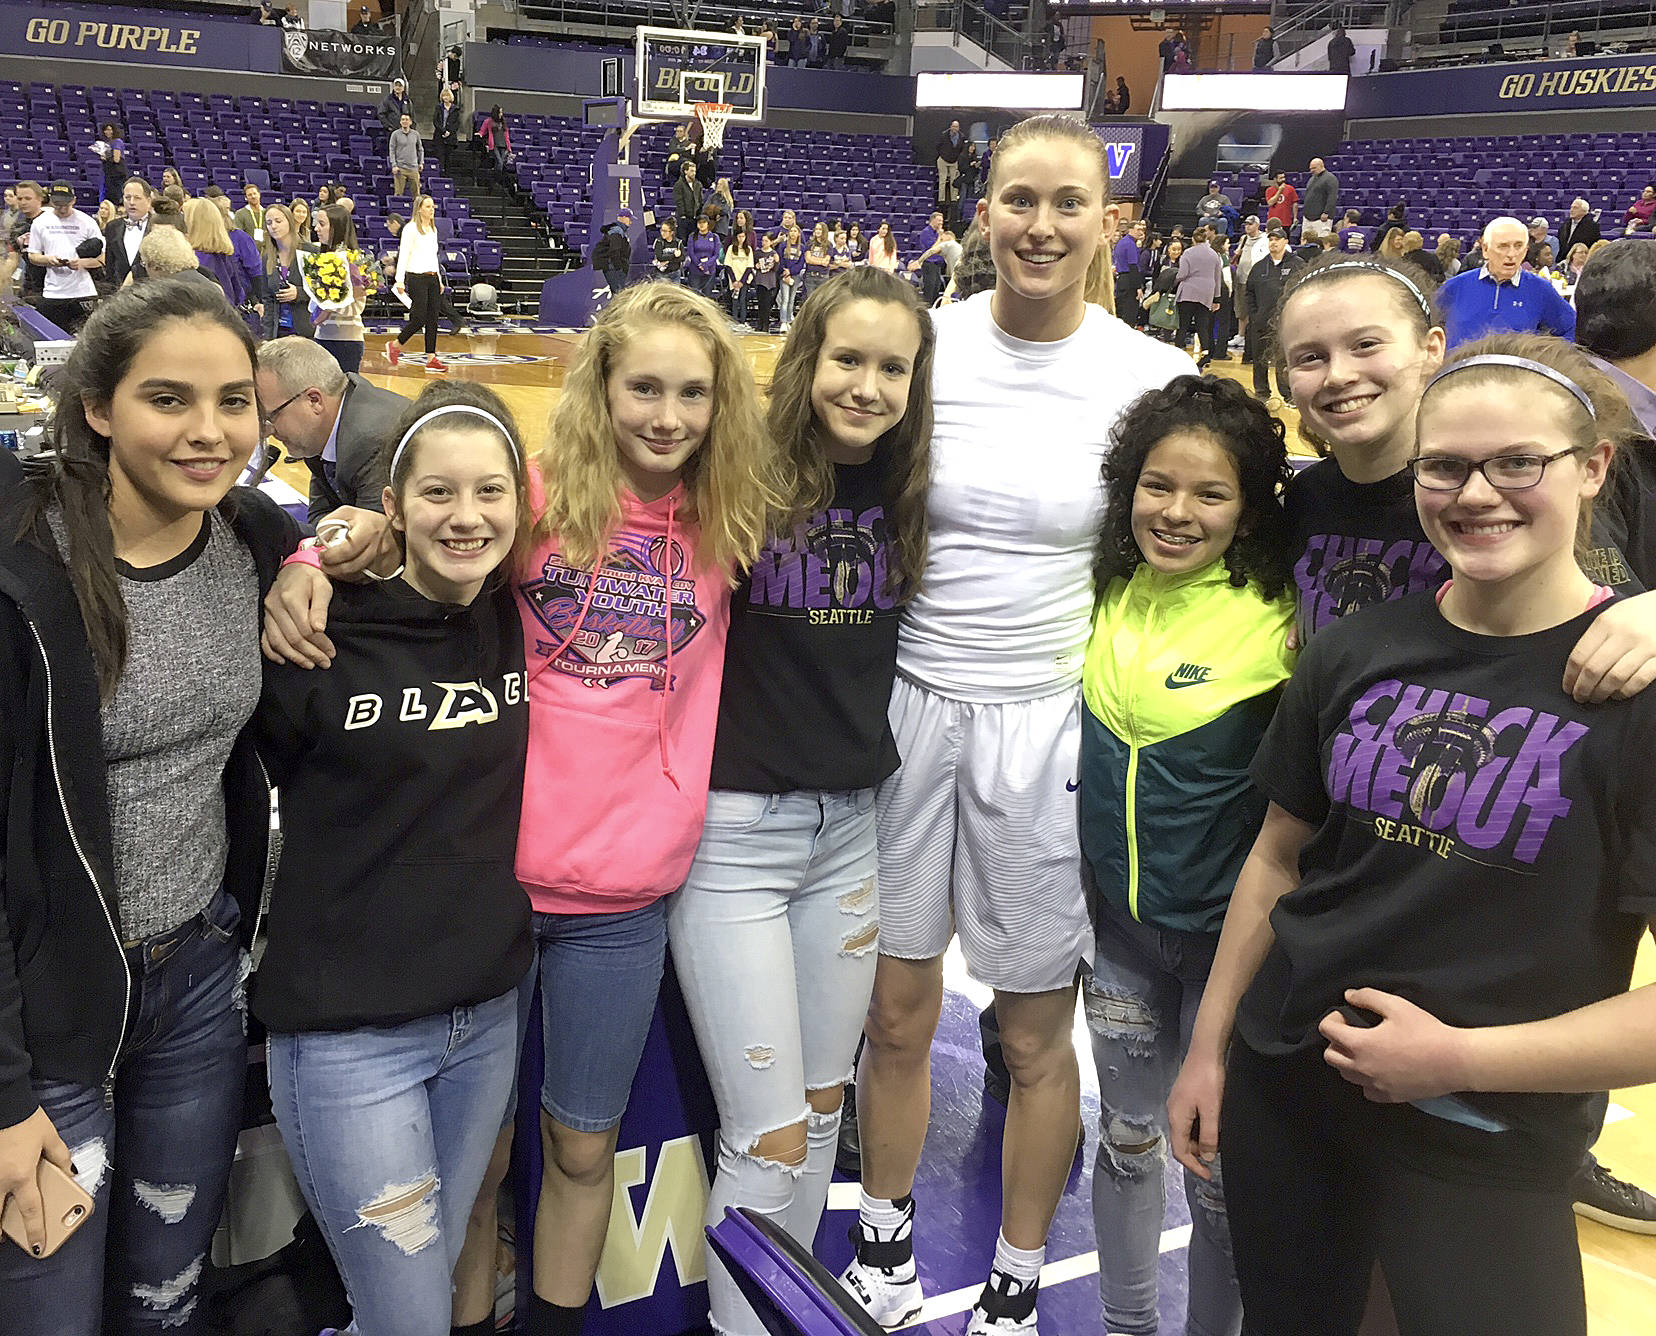 Members of the Olympic Avalanche Black basketball team attend a historic University of Washington women’s game Sunday in which Kelsey Plum scored 57 points to become the all-time NCAA scoring leader. From left, Courtney Swan, Khloe Stanard, Emilia Long, Hannah Reetz, University of Washington player Katie Collier, Camille Stensgard, Jaida Wood and Myra Walker.